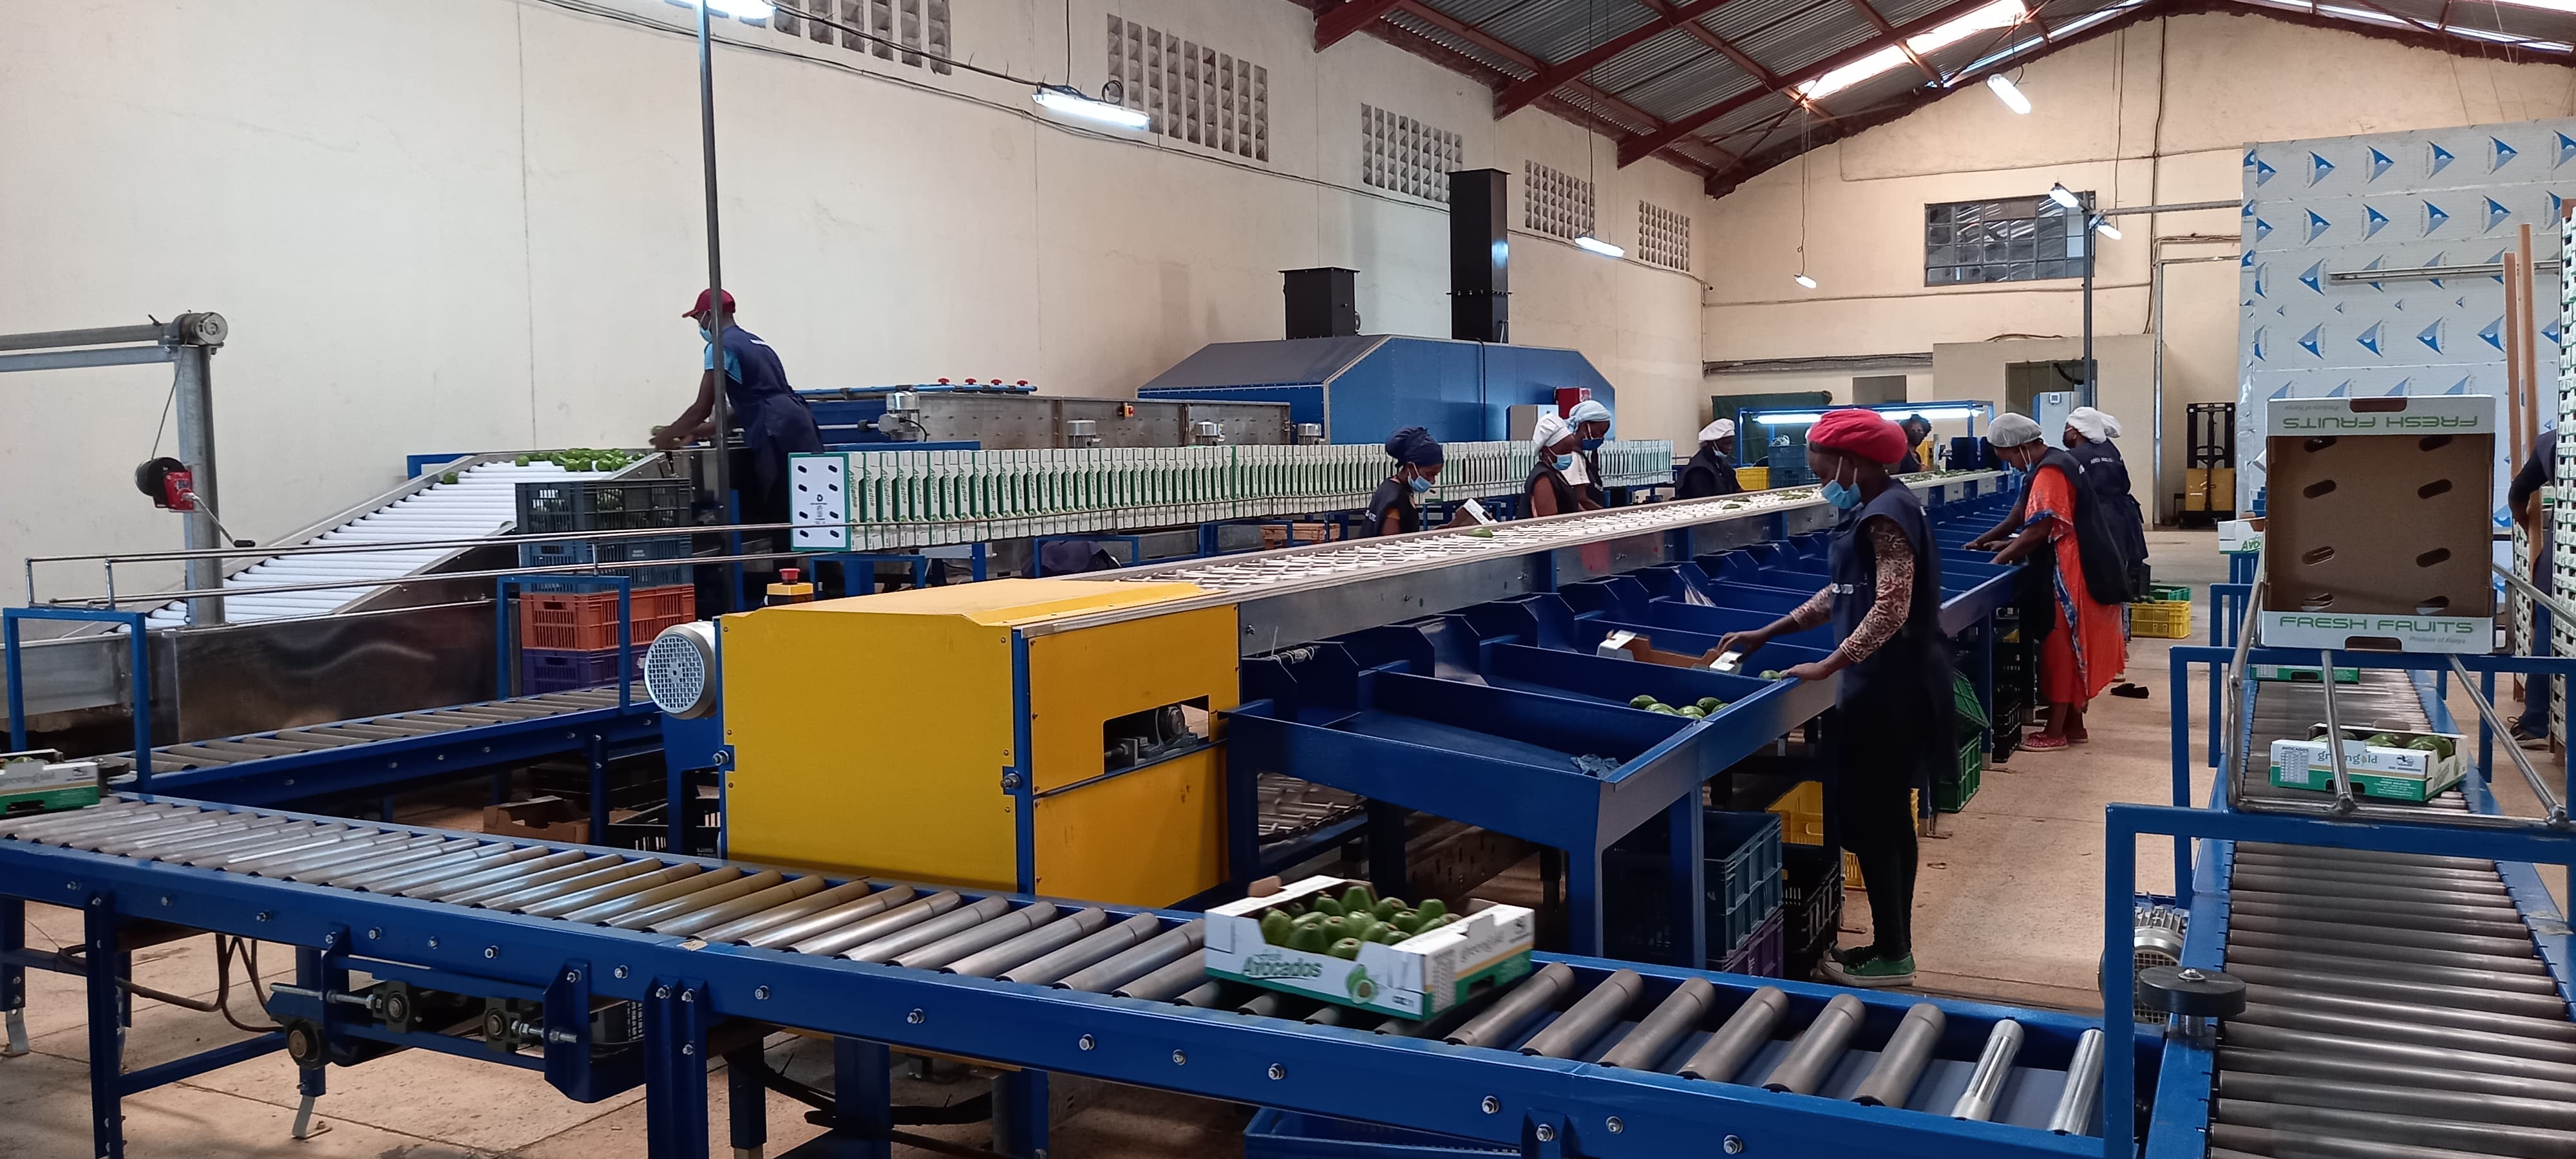 Our facility where we processing Avocado for export and offer jobs to over 70 people